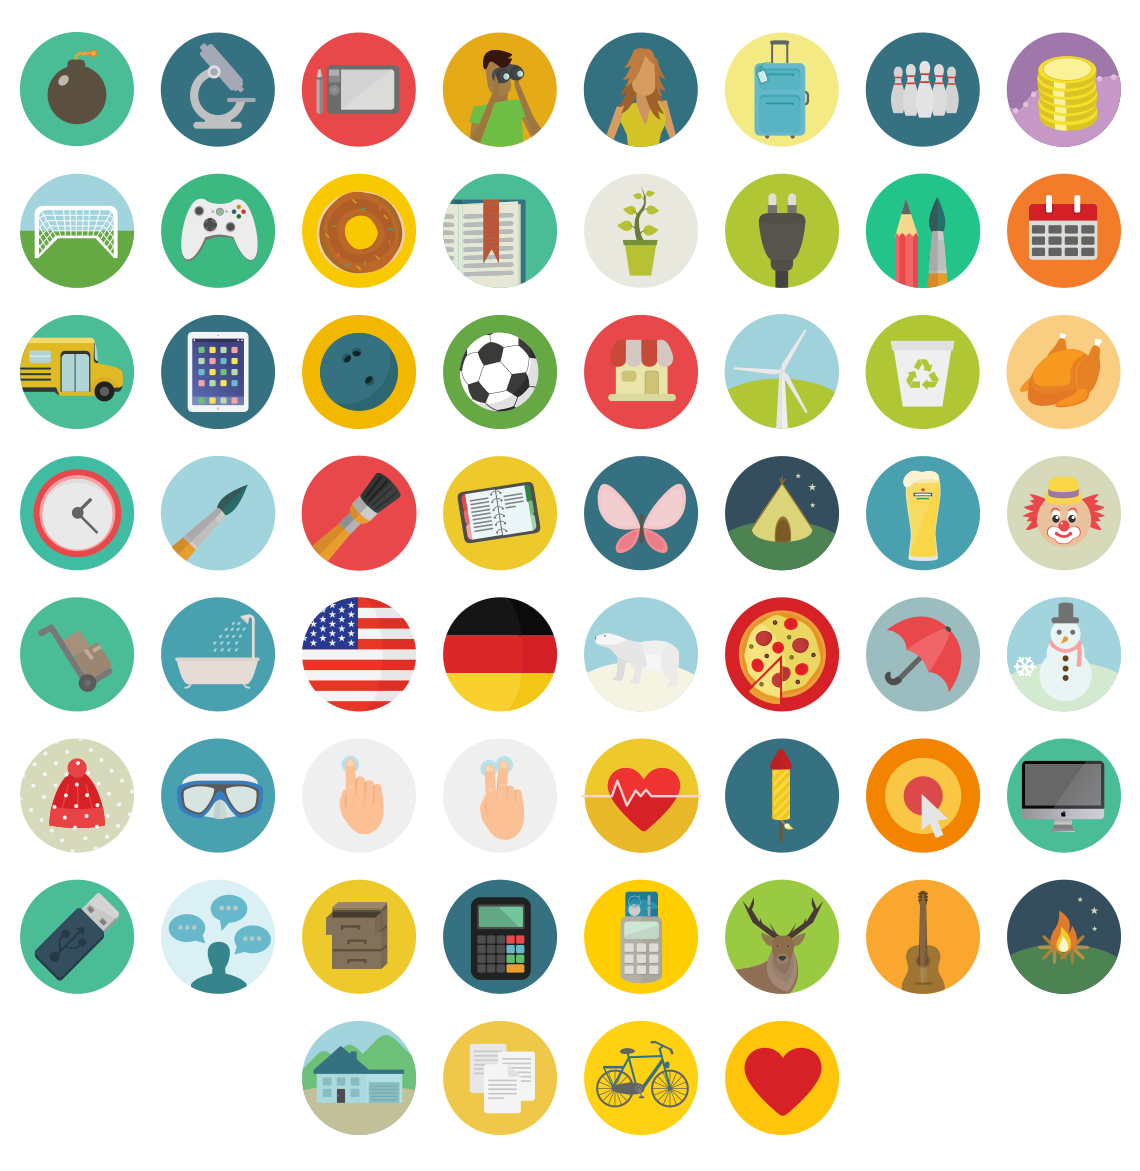 30 Internet contact circle icons - Vector download